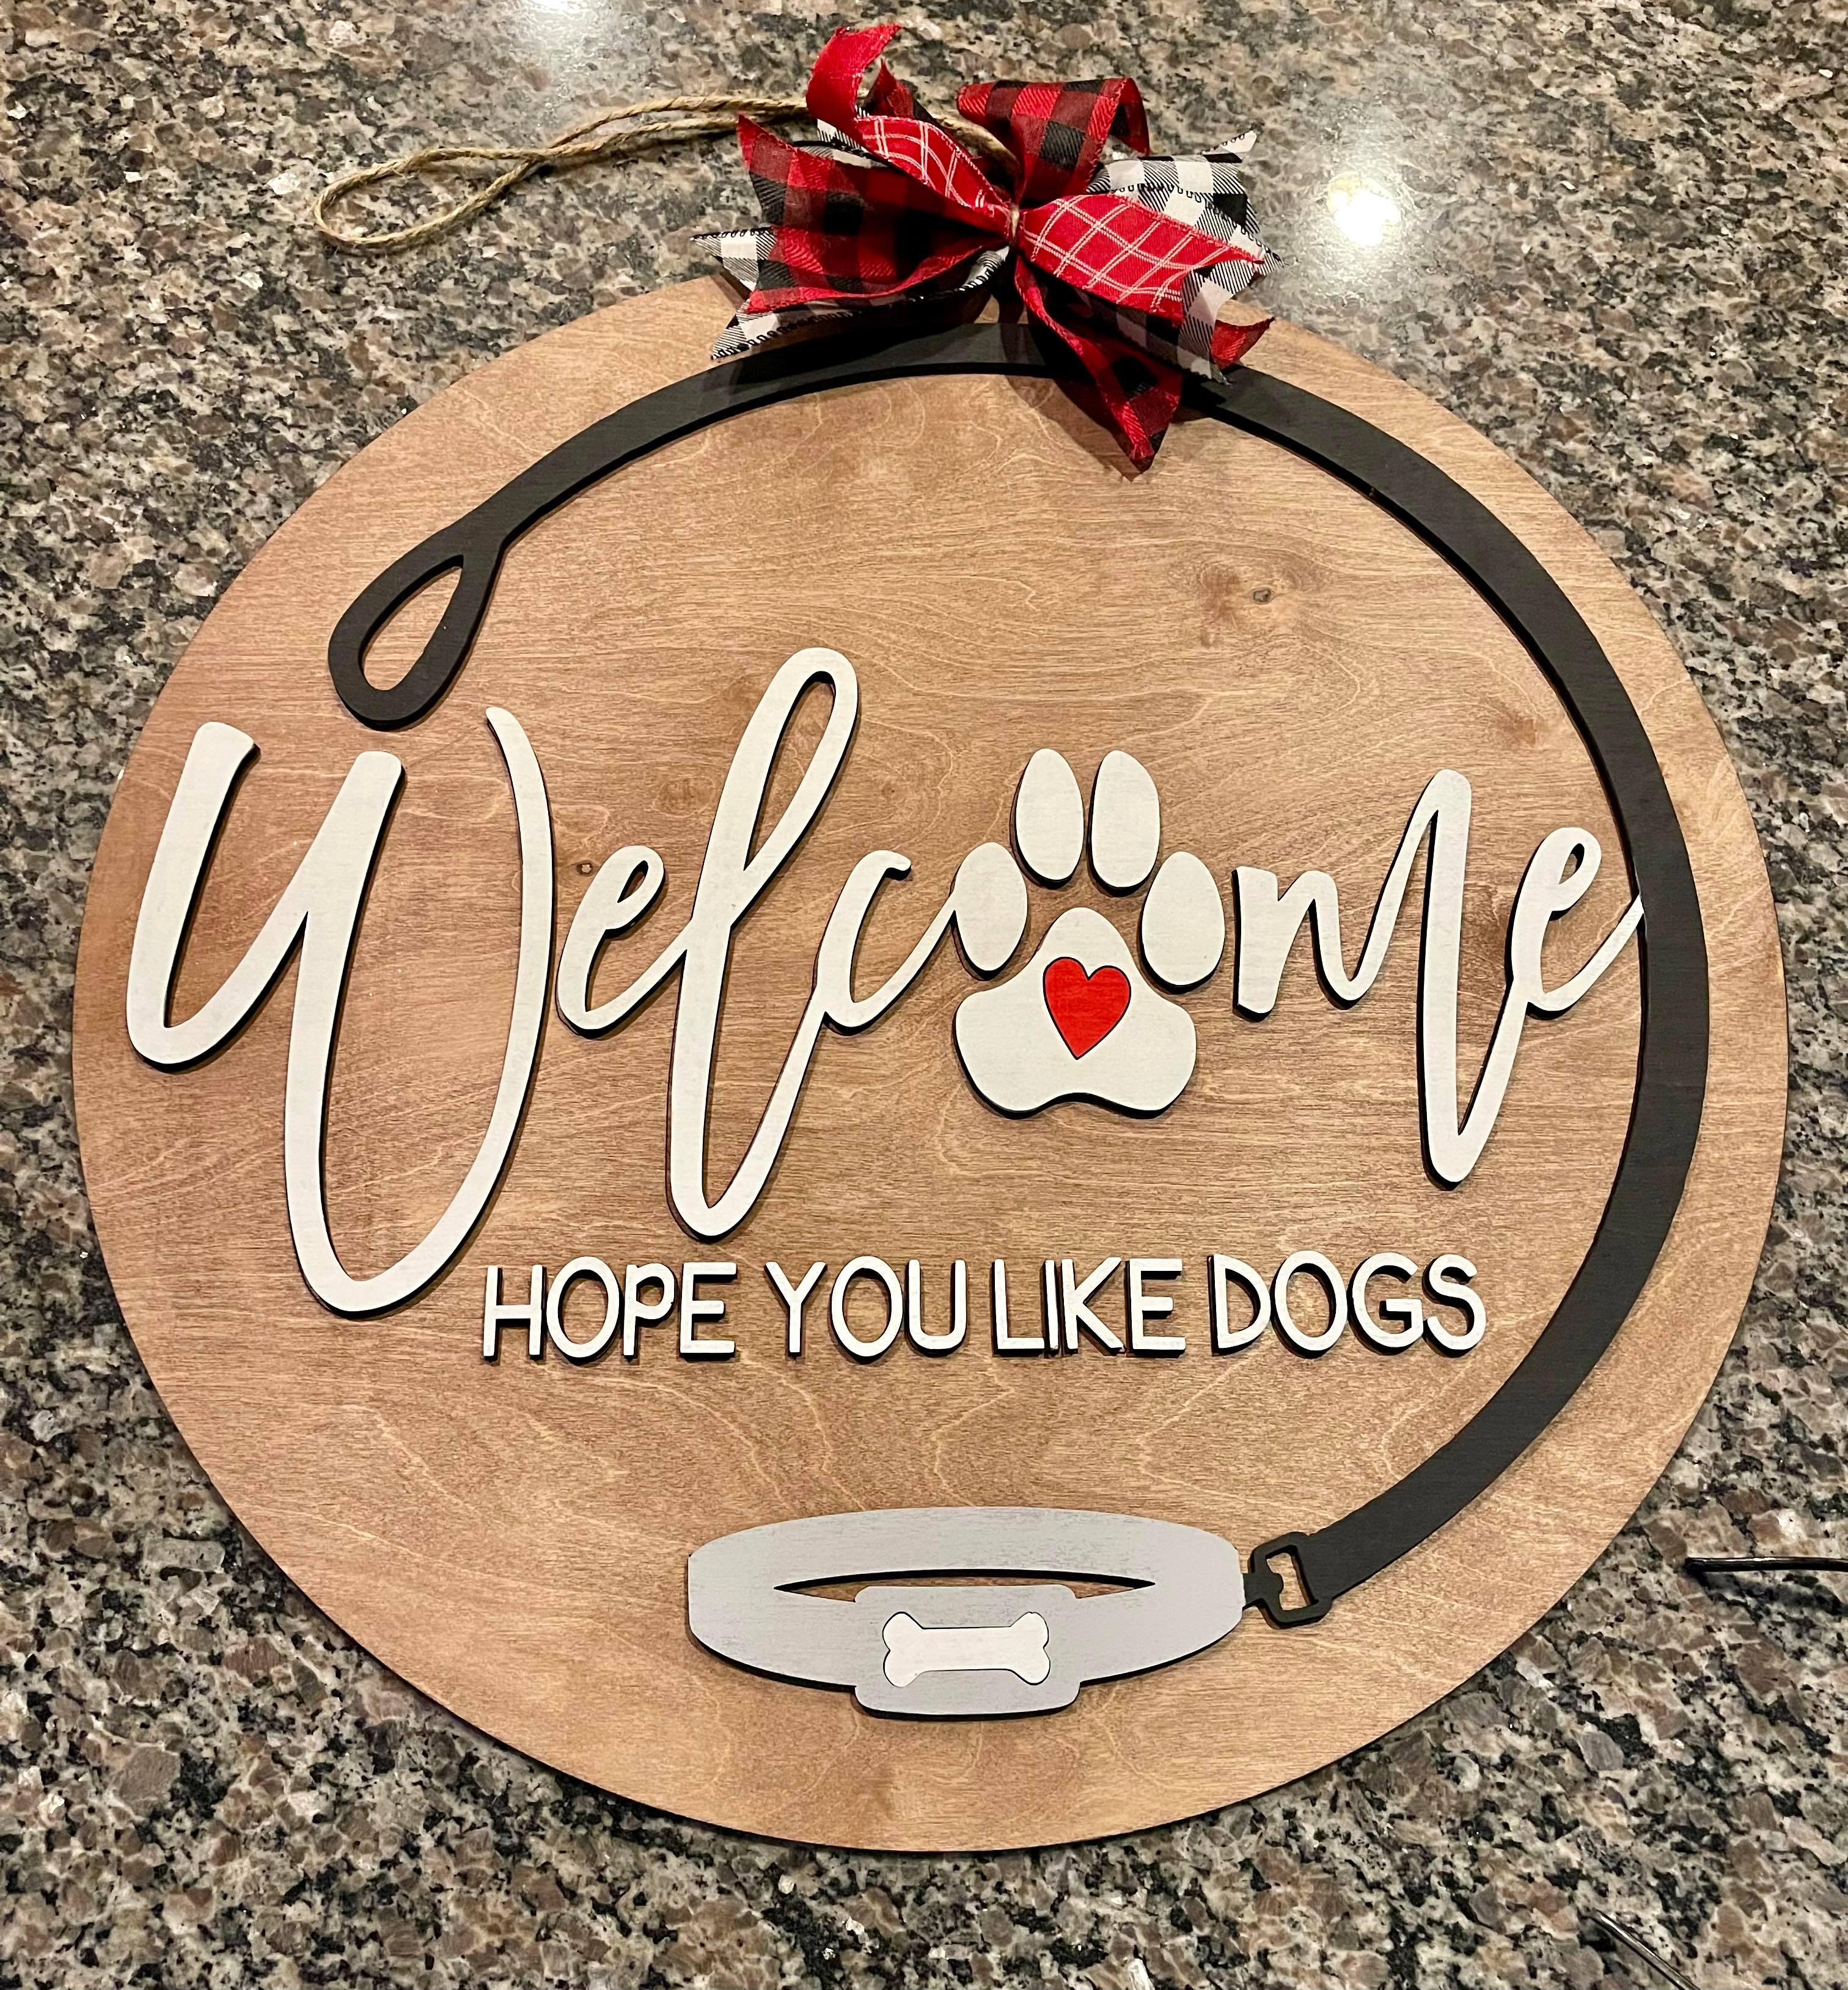 3D Door hanger Welcome Hope you like dogs with dog leash and collar